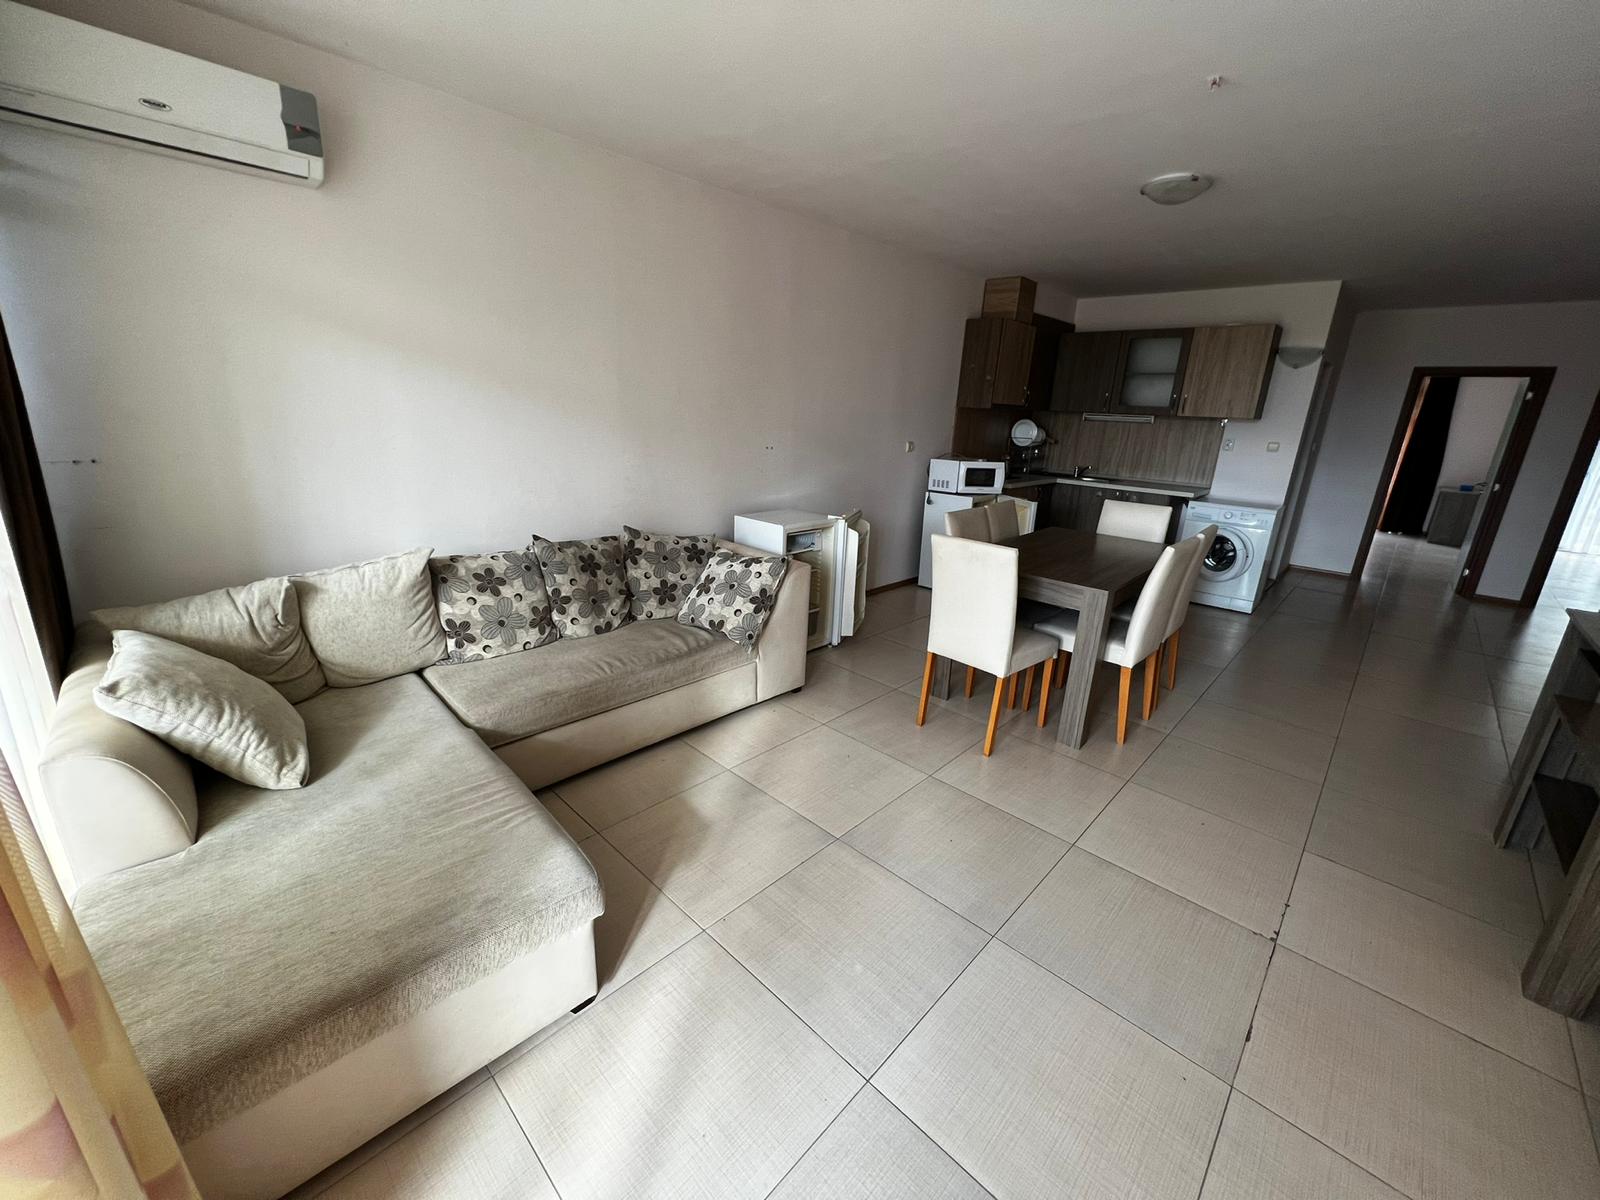 For Sale: An amazing two-bedroom apartment in Sunny Beach